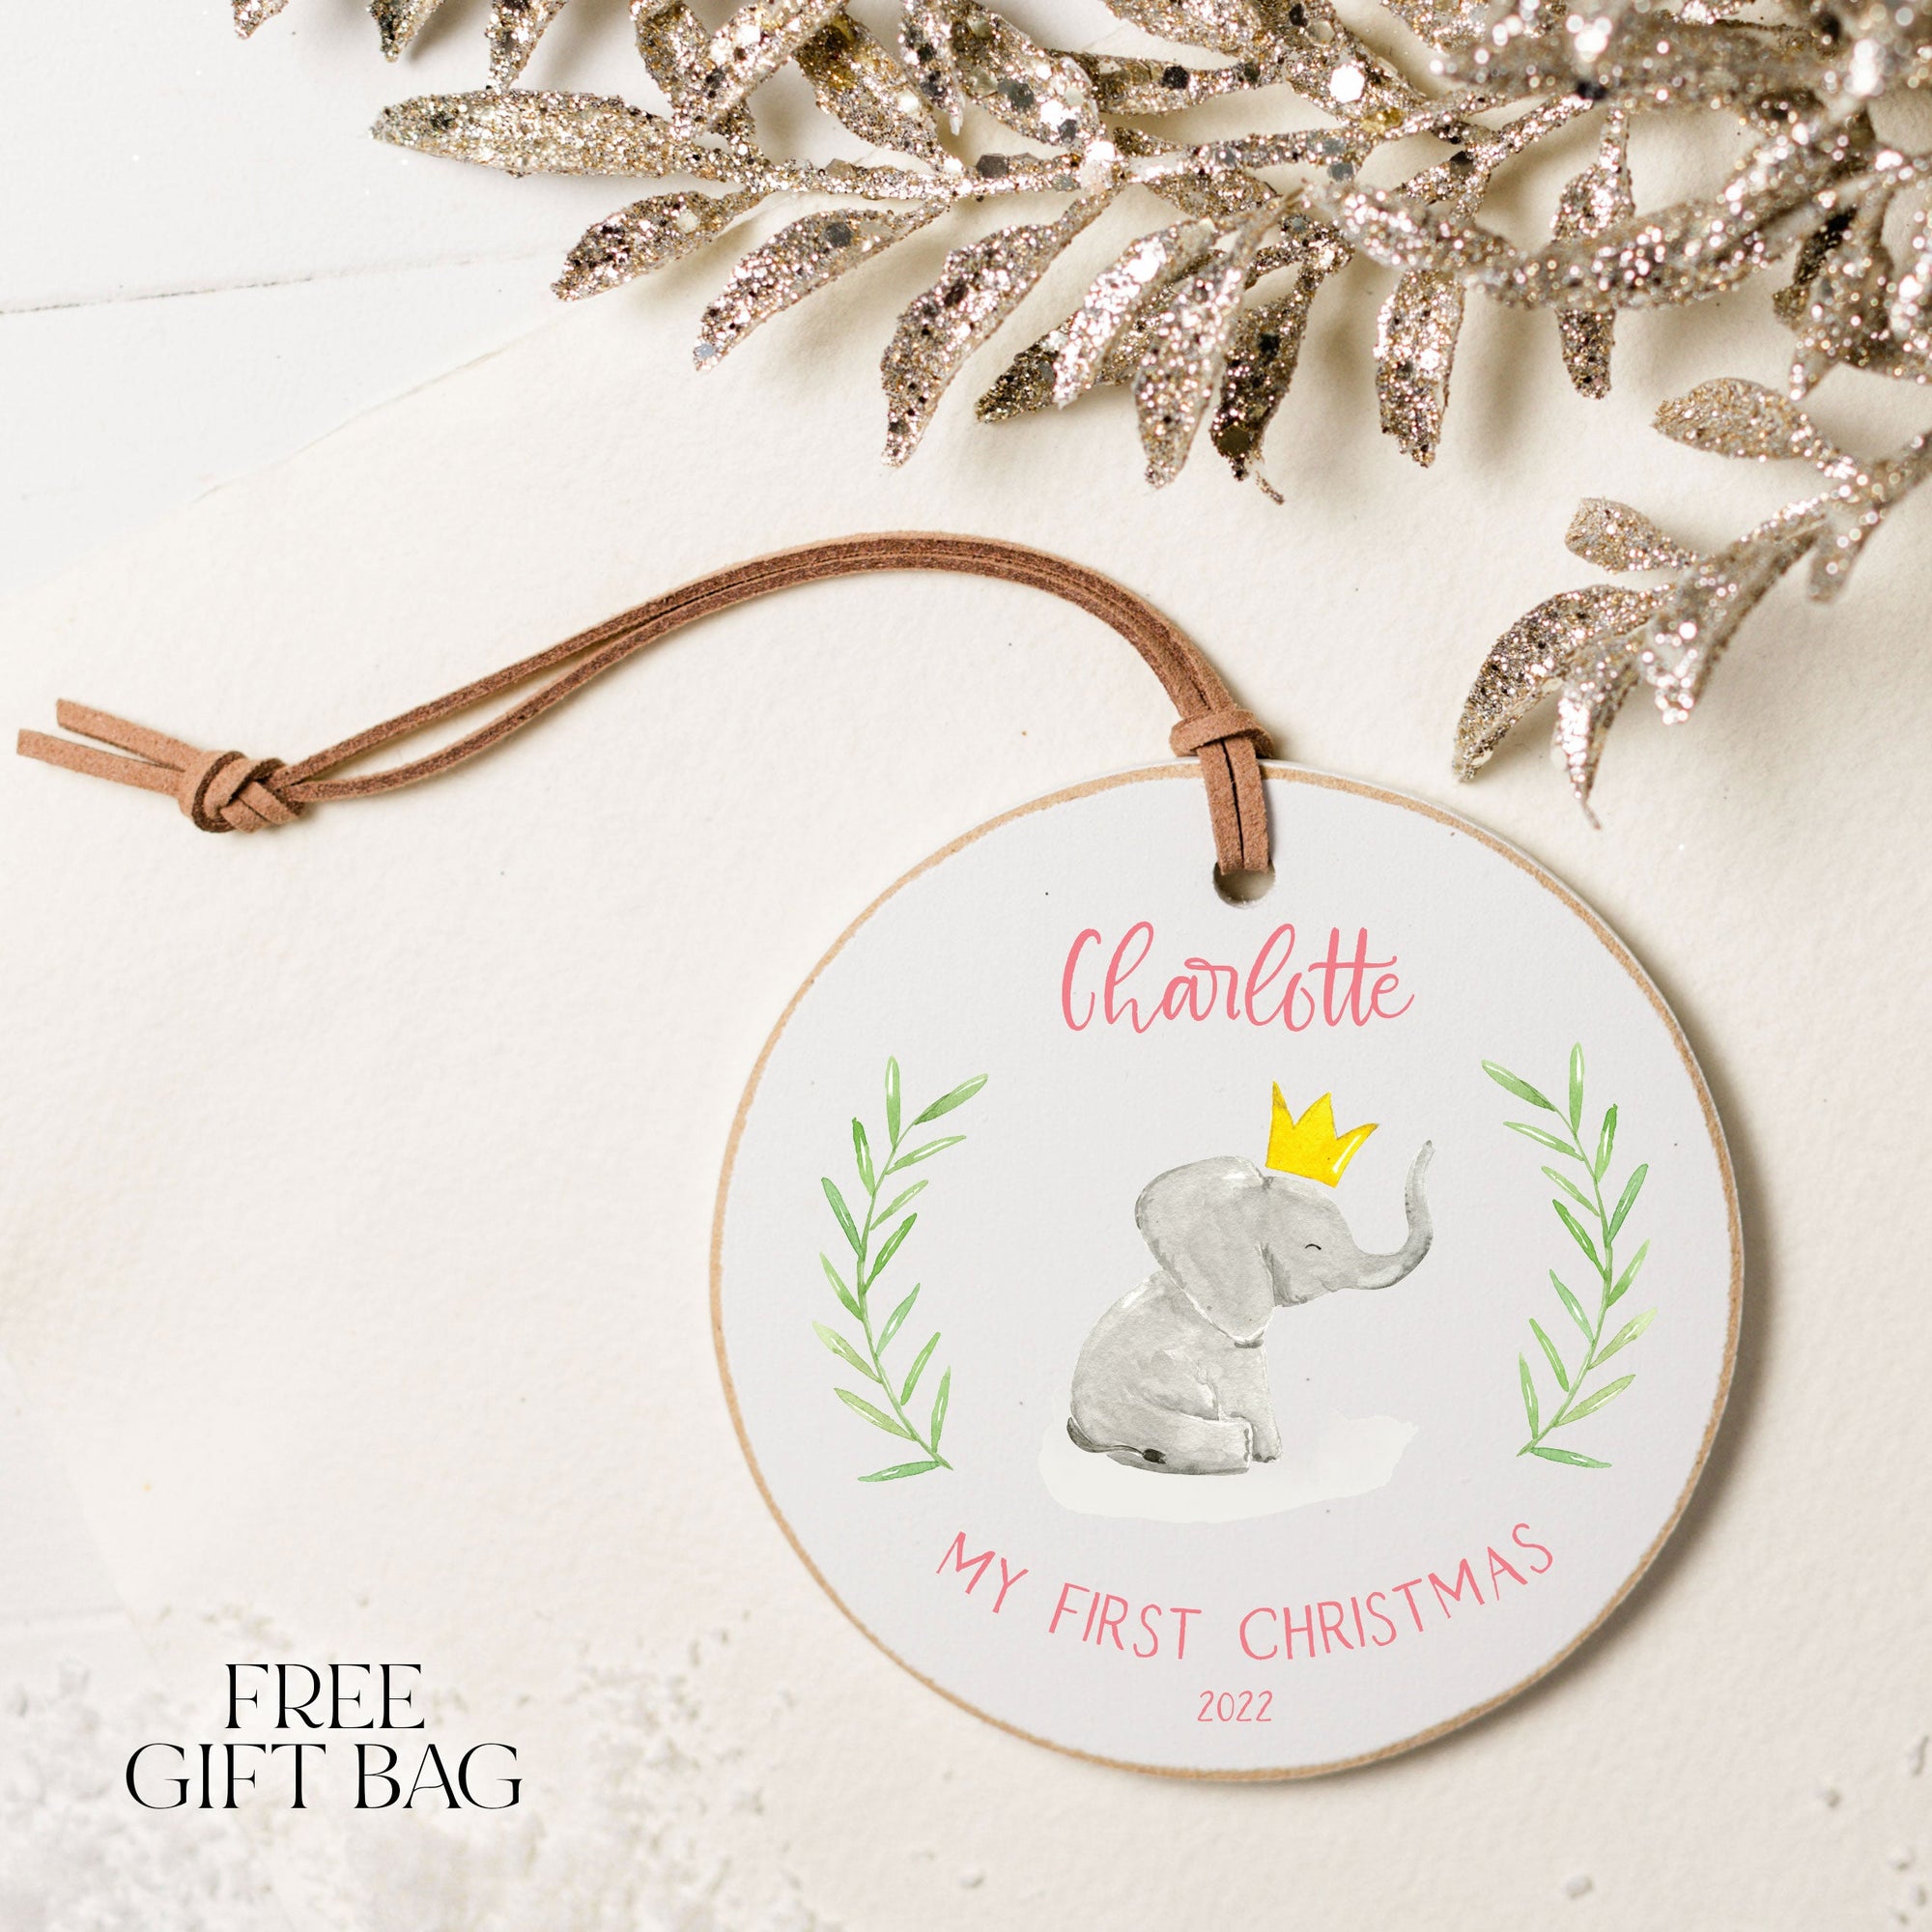 Customizable Ornament | Baby Elephant with Crown Holiday Ornaments The WAREHOUSE Studio 